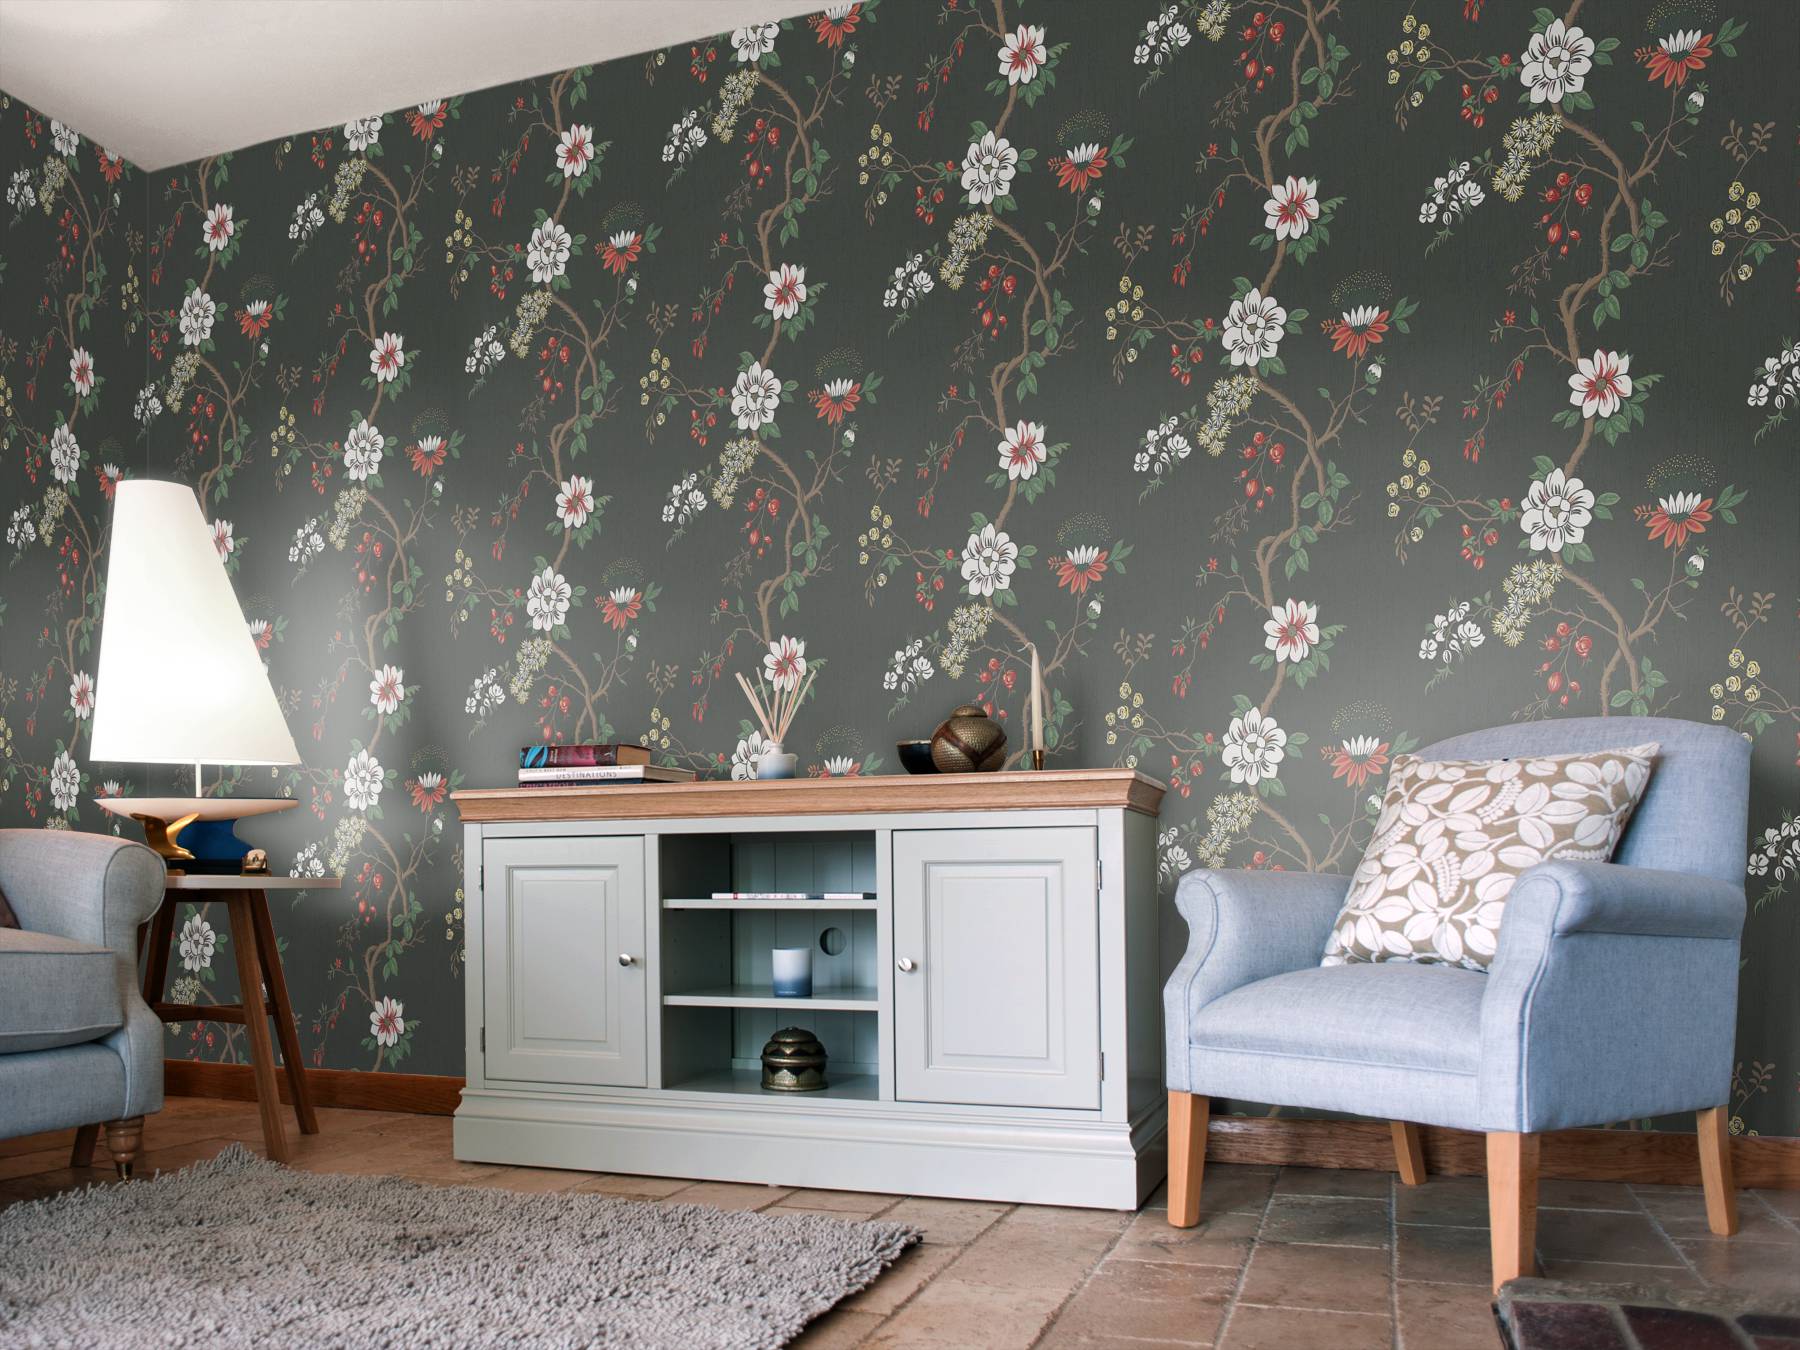 Camellia Roomset Image - Cole & Son Hummingbird , HD Wallpaper & Backgrounds